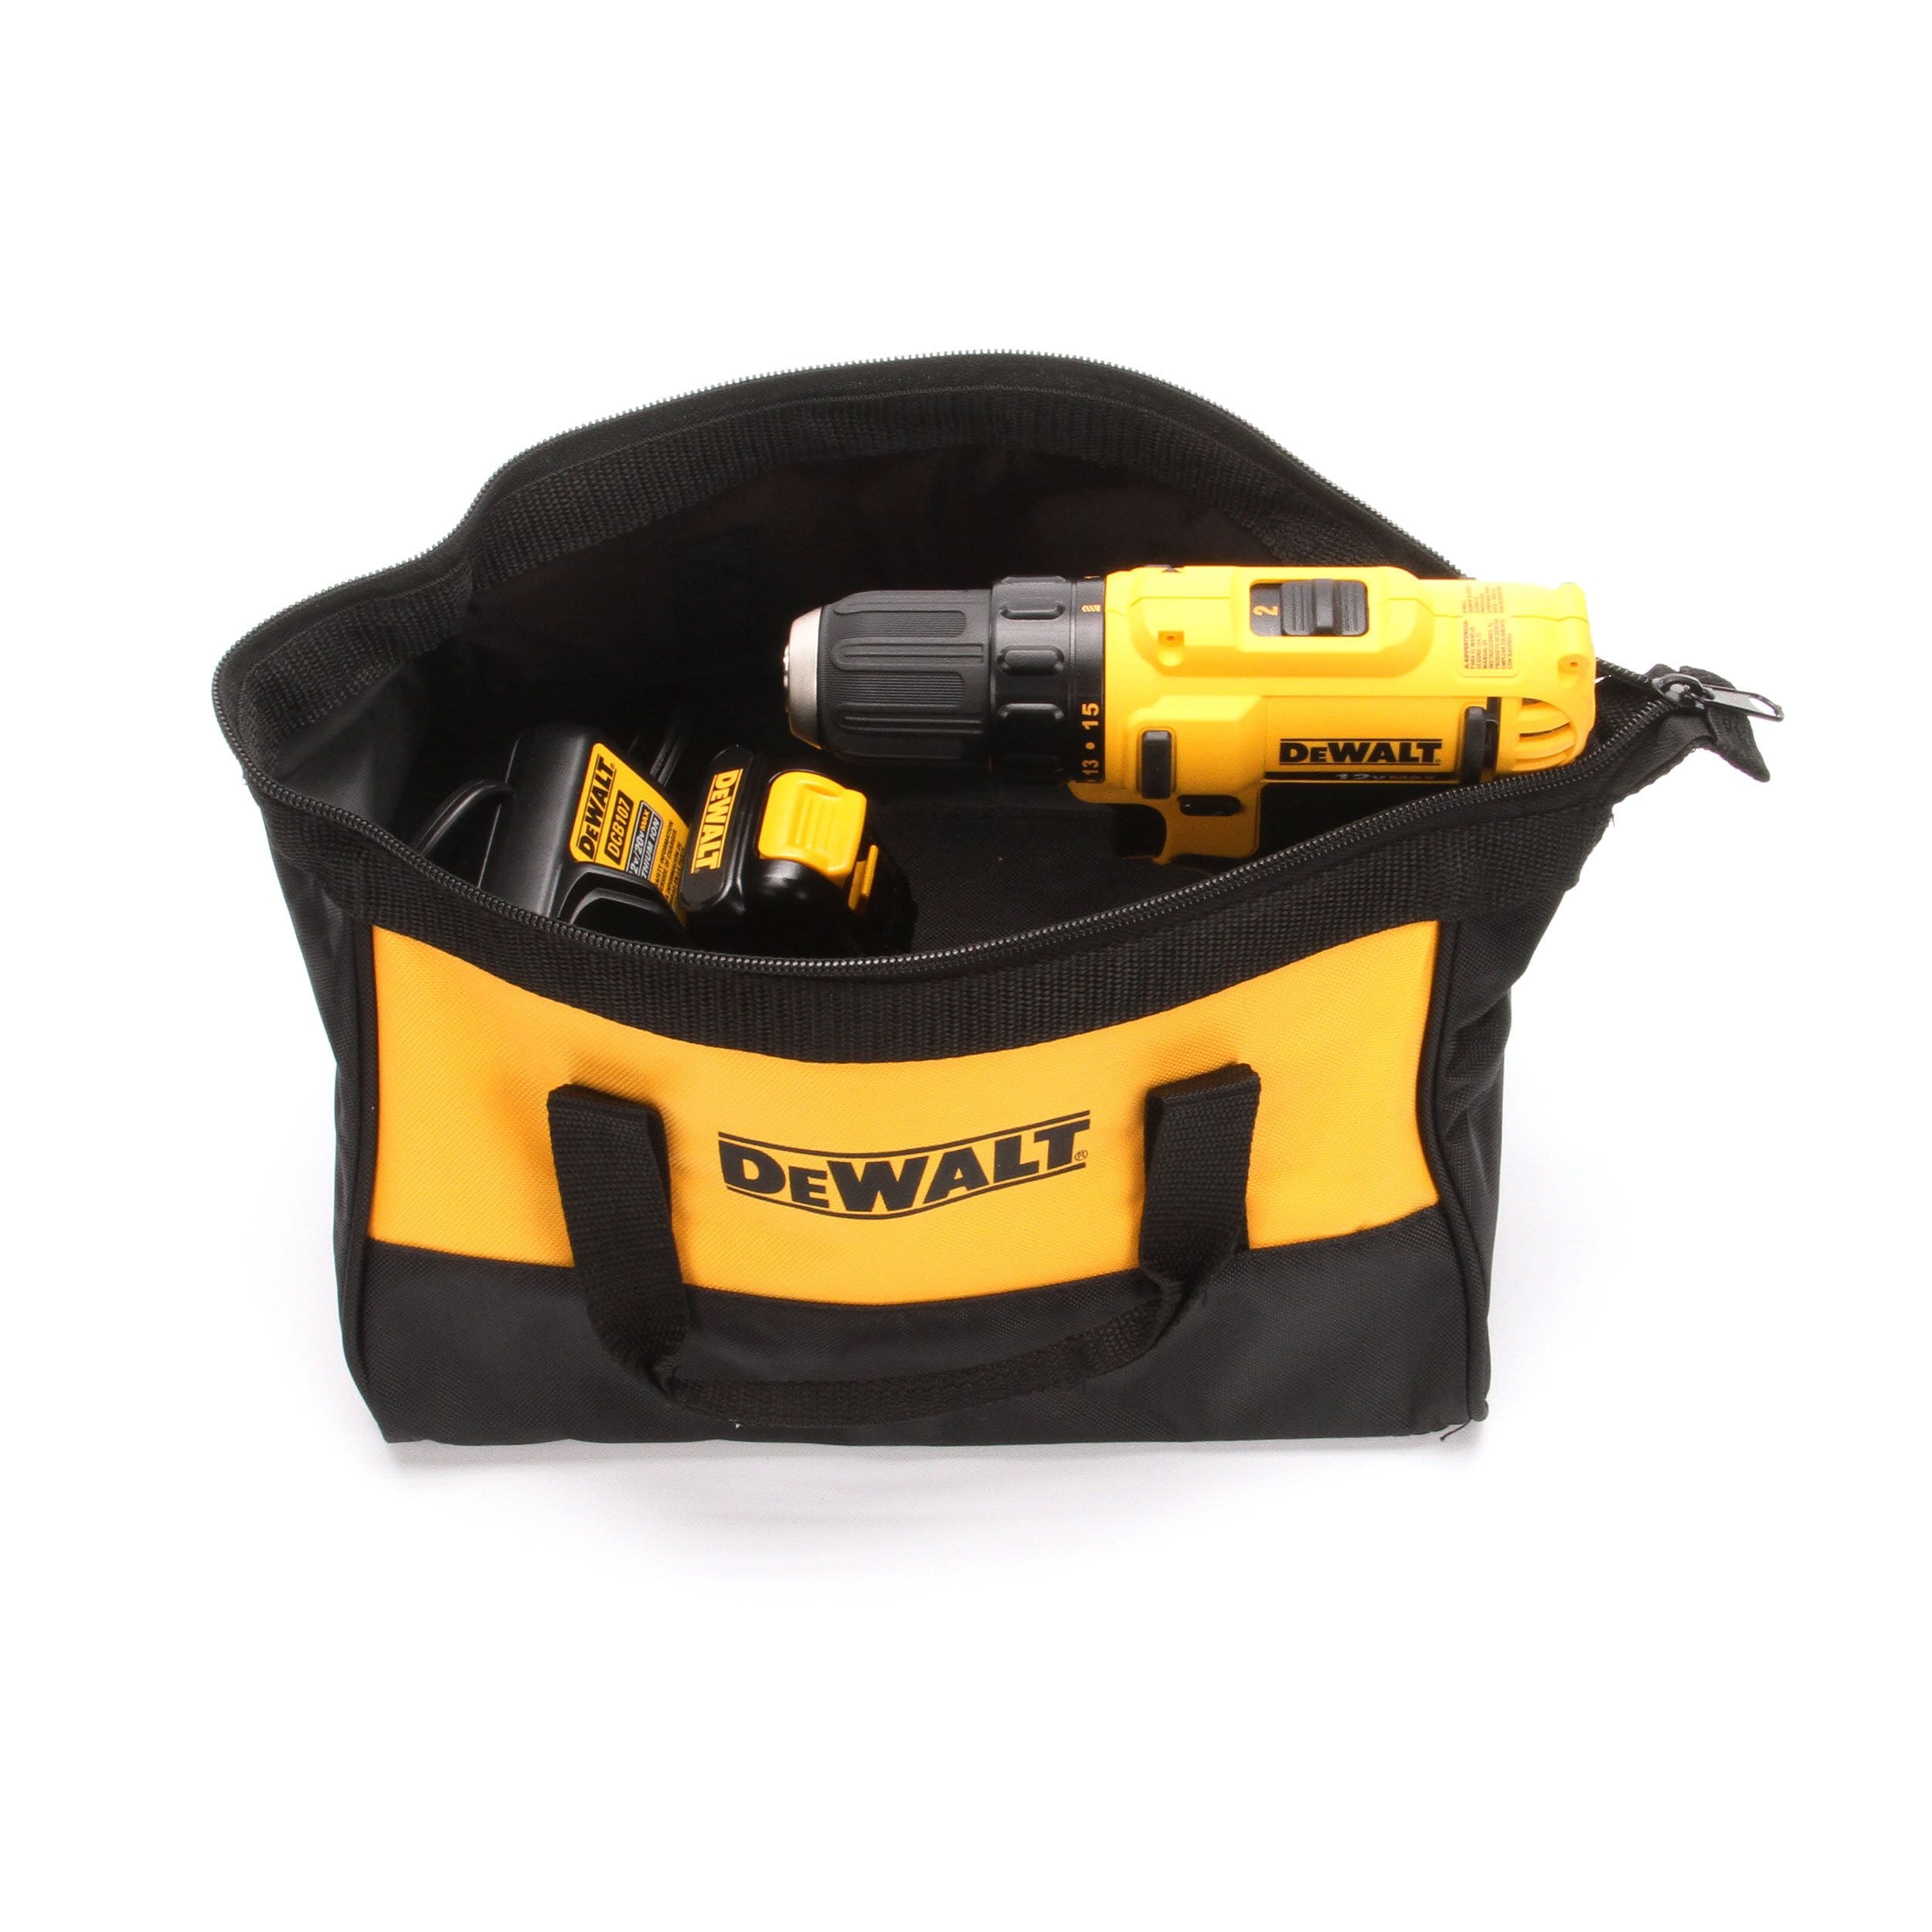 DEWALT 12-volt Max 3/8-in Cordless Drill (2-Batteries Included and 